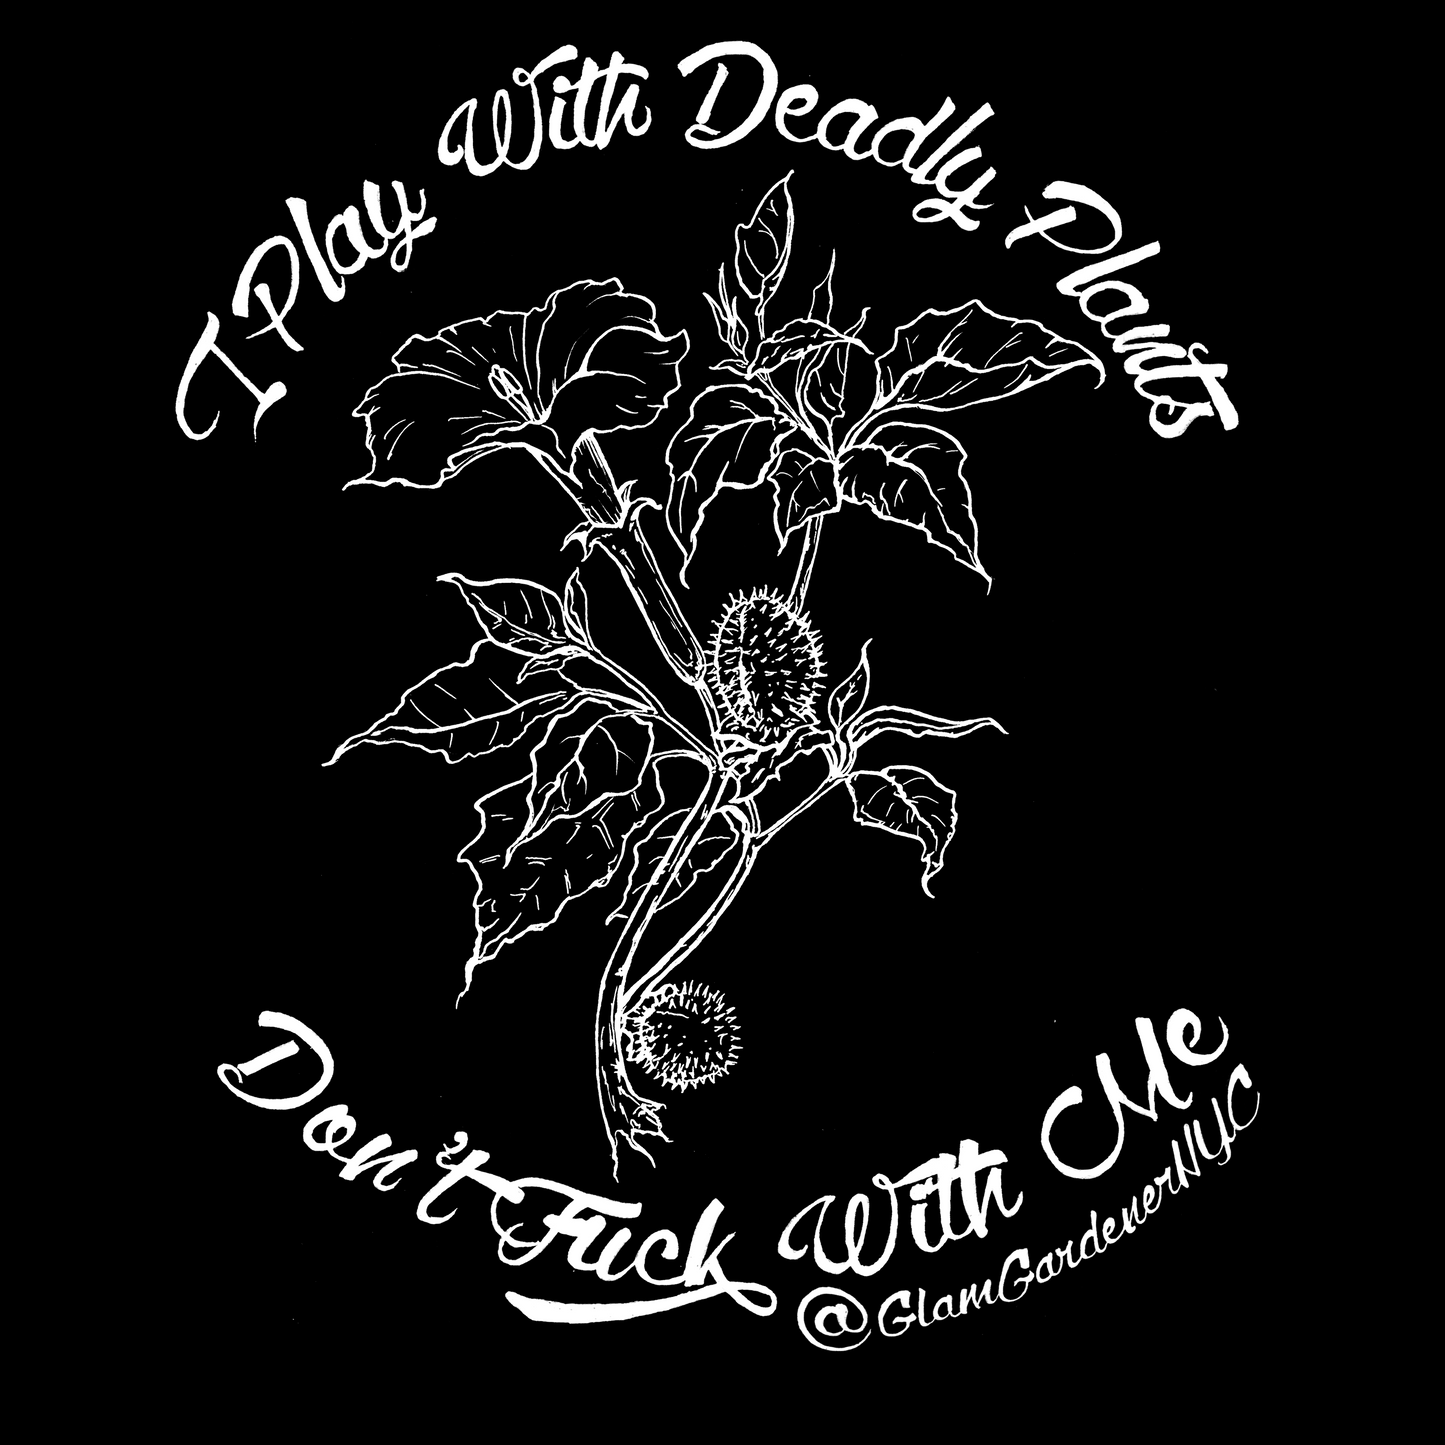 I play with deadly plants, don't f*ck with me  featuring datura stramonium (angel's trumpet) organic cotton tote bag